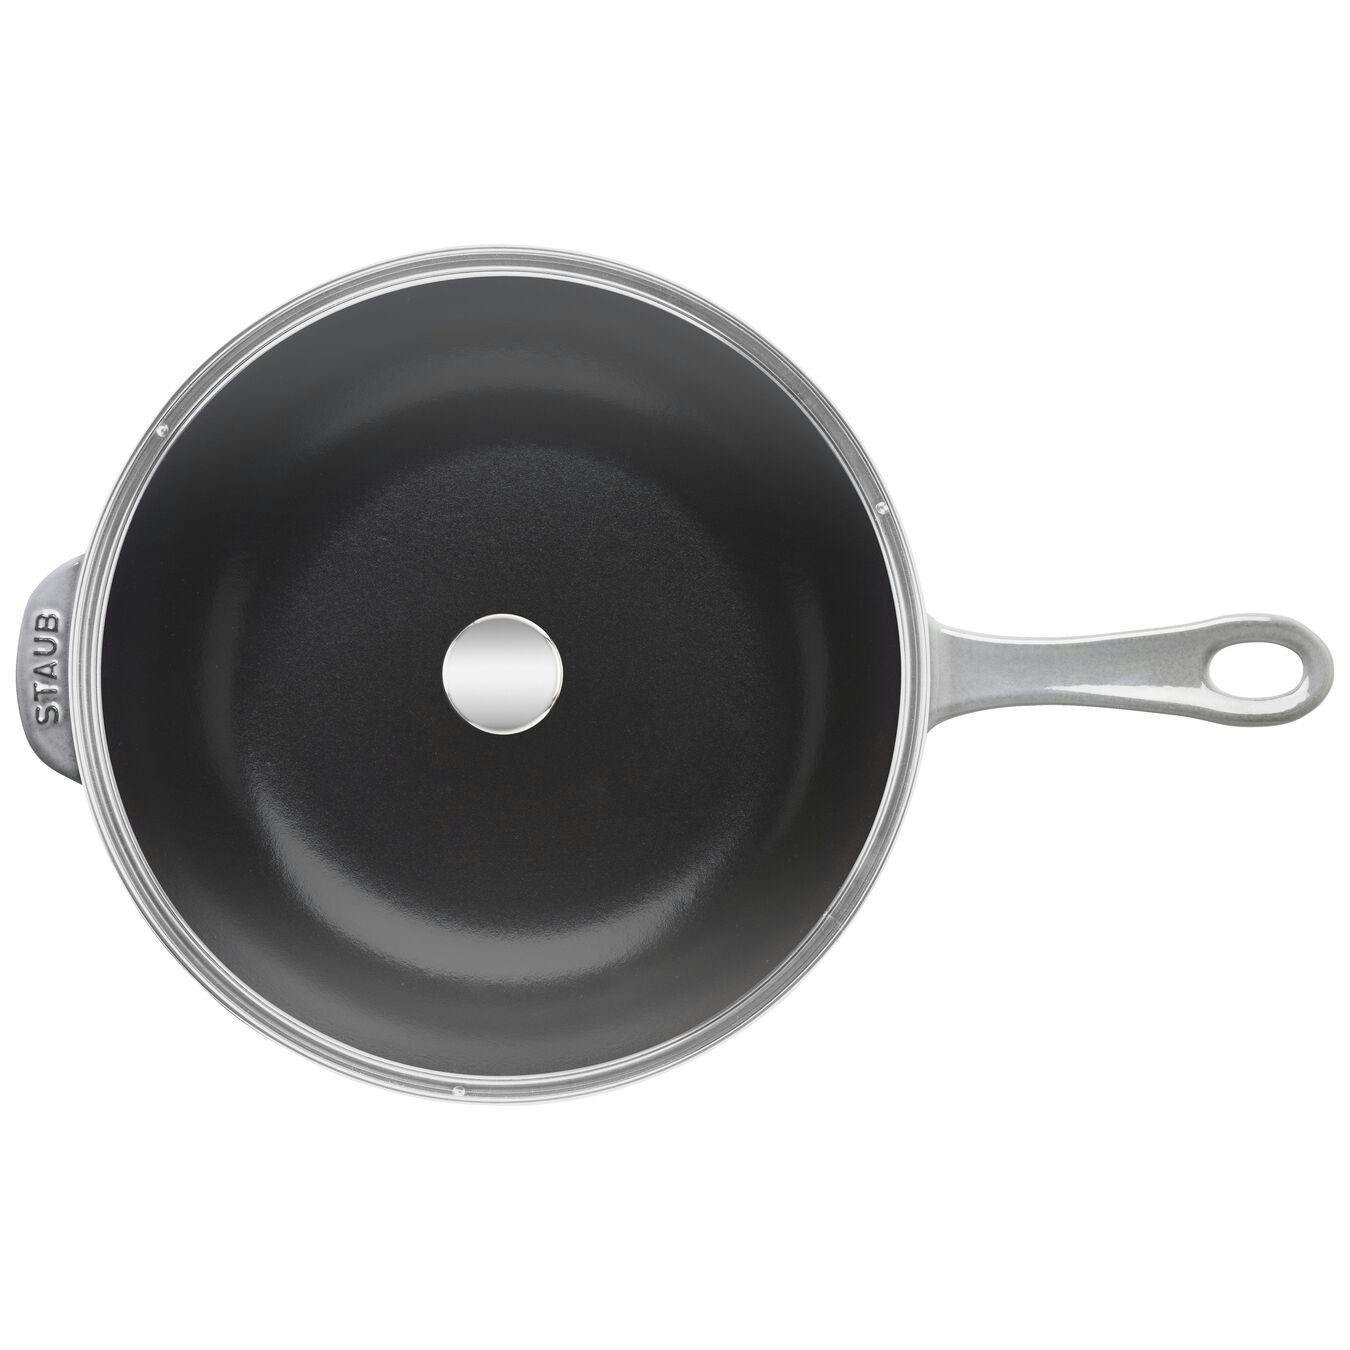 Staub Cast Iron 10-Inch, Daily Pan With Glass Lid, Graphite Grey